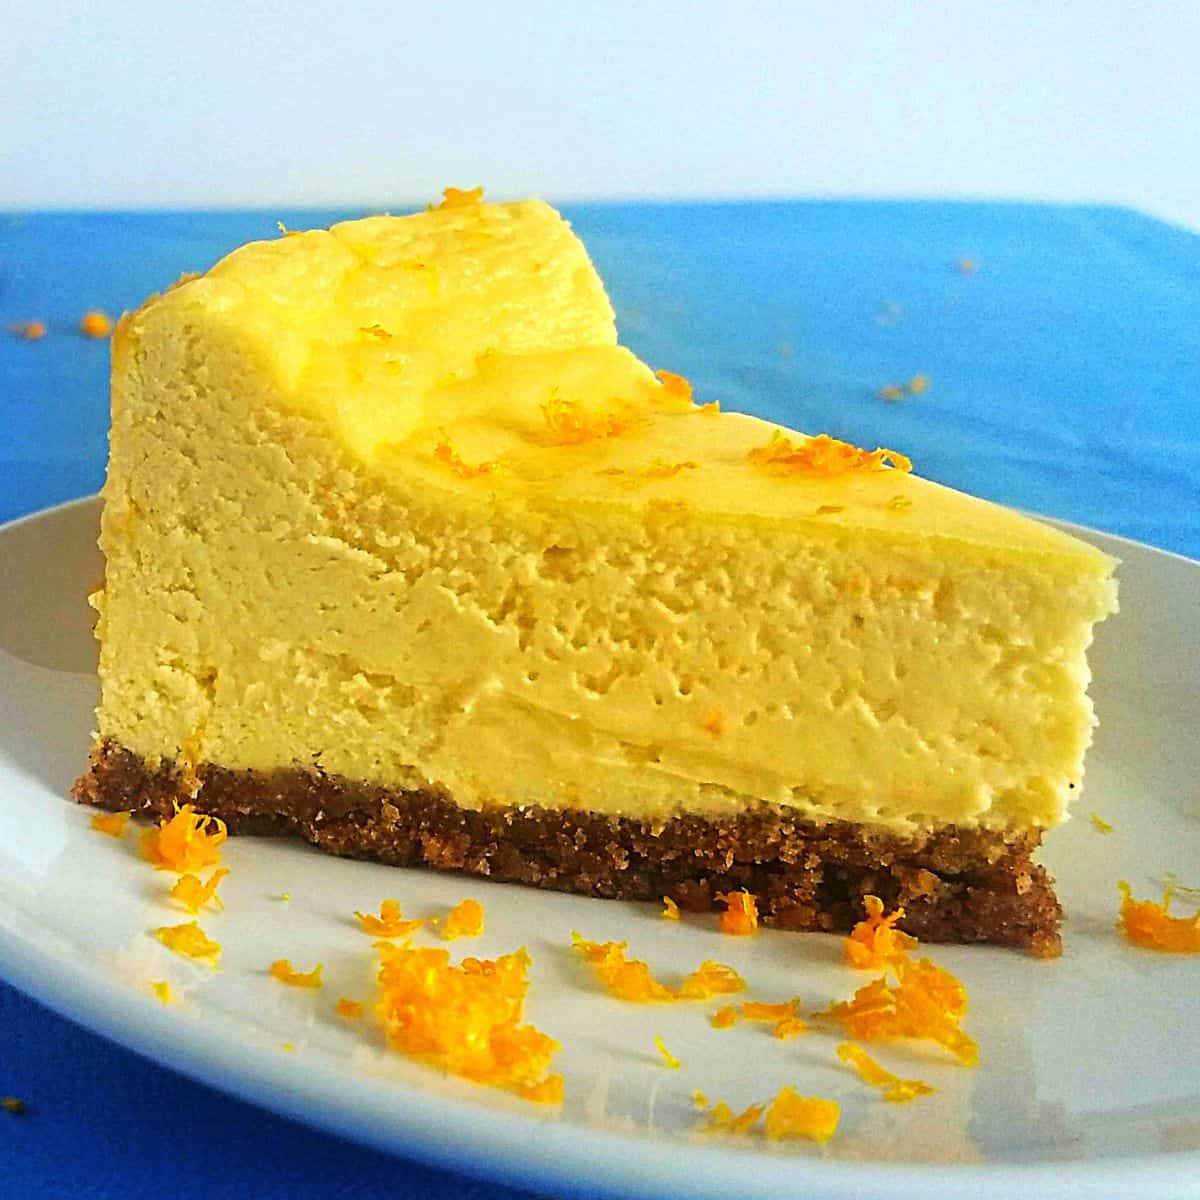 orange cream cheesecake - 21Keto and Low-Carb Desserts Without Erythritol